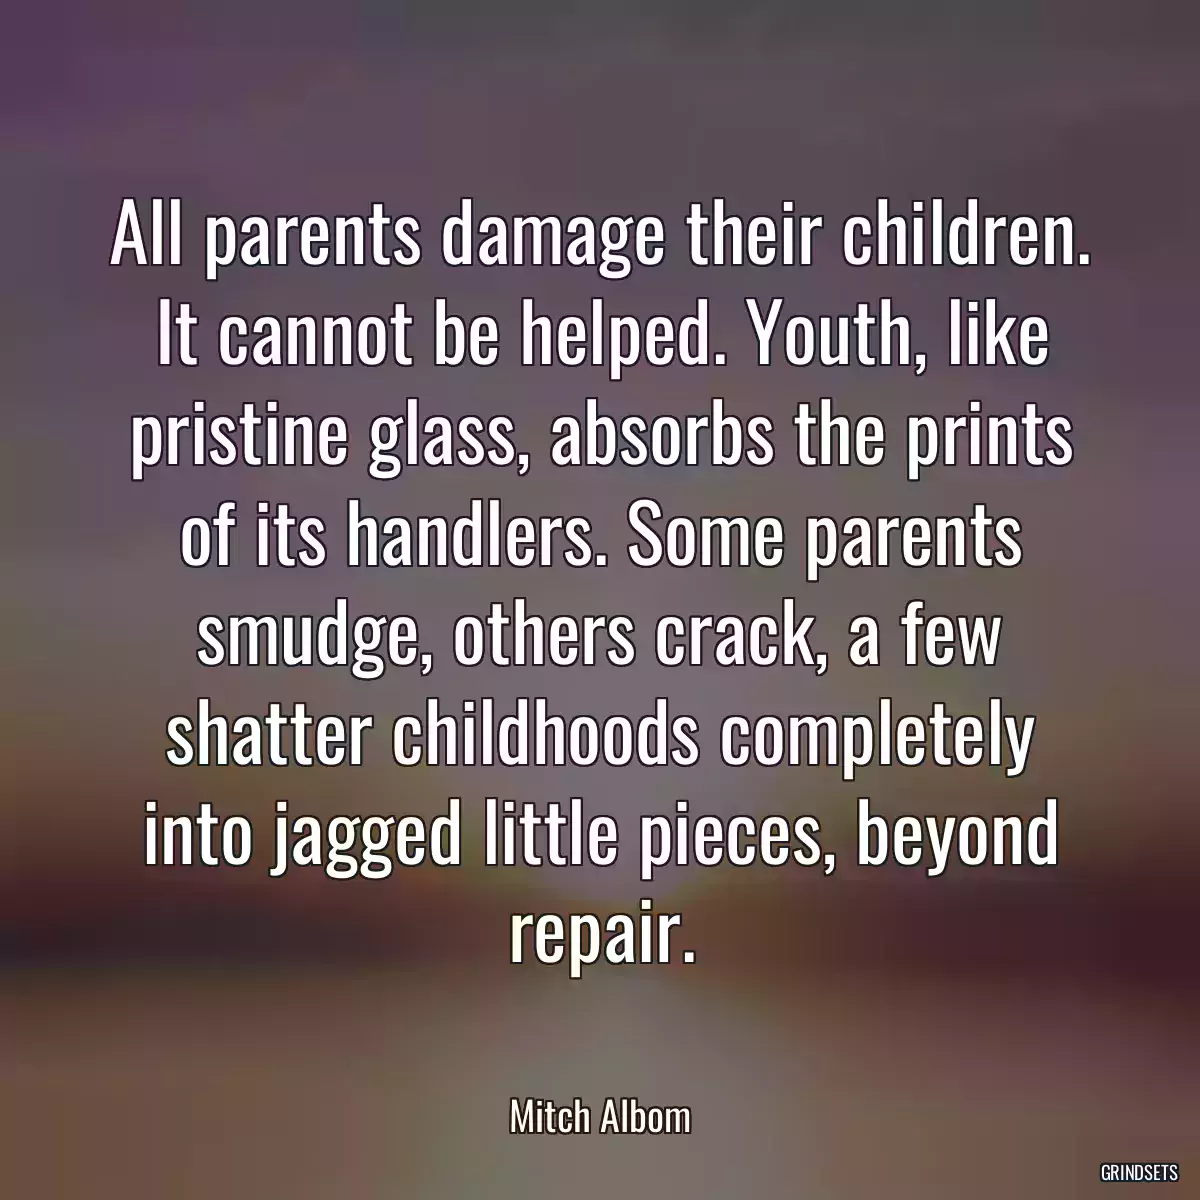 All parents damage their children. It cannot be helped. Youth, like pristine glass, absorbs the prints of its handlers. Some parents smudge, others crack, a few shatter childhoods completely into jagged little pieces, beyond repair.